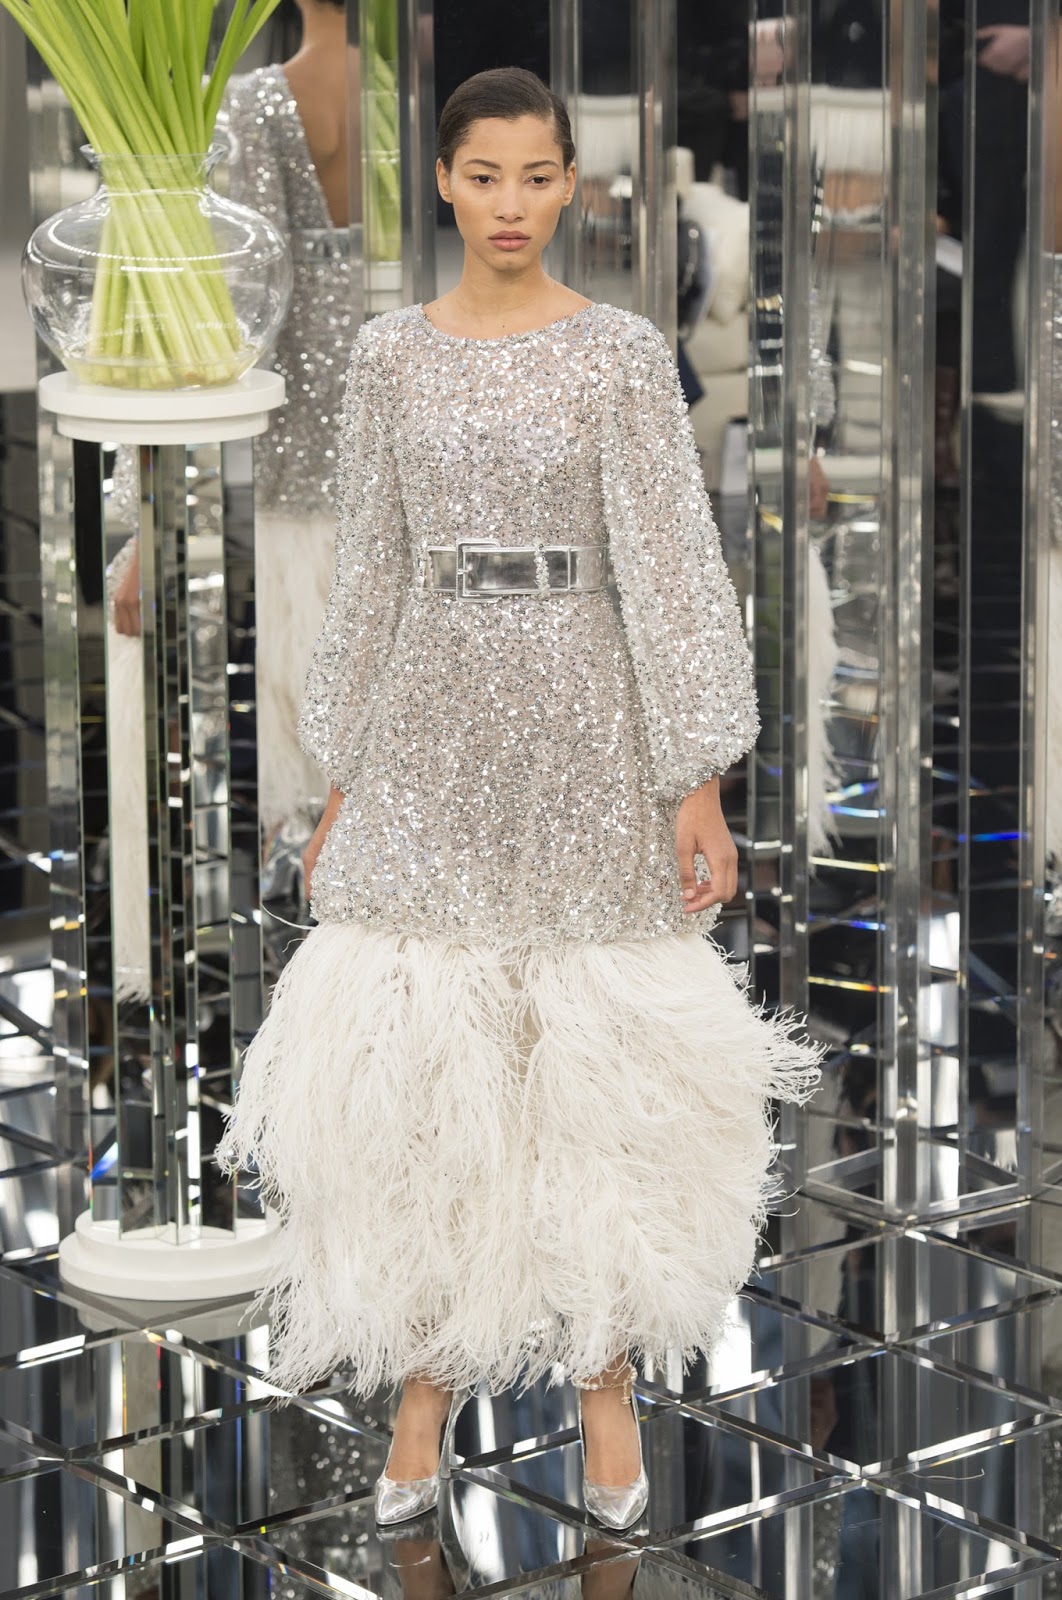 CHANEL: SIMPLY STUNNING